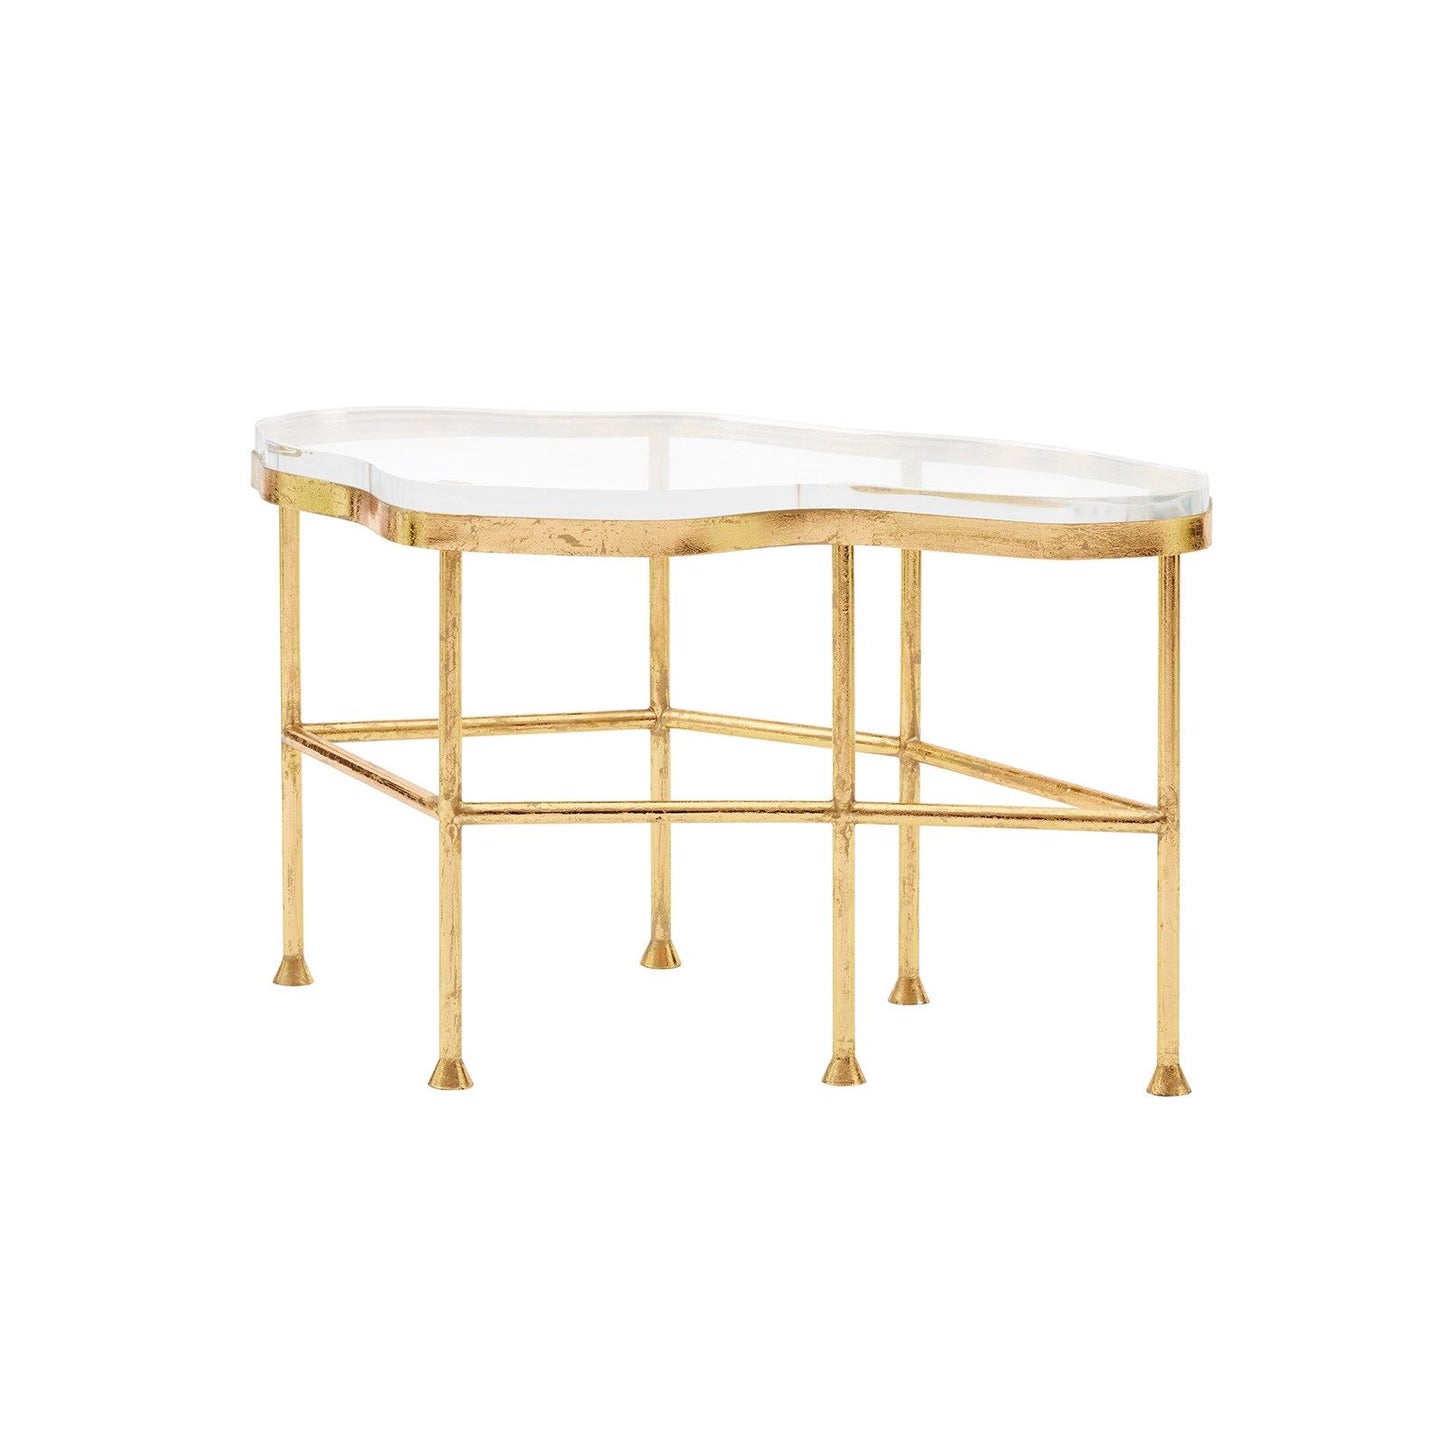 Cristal Coffee Table, Gold Table Bungalow 5     Four Hands, Burke Decor, Mid Century Modern Furniture, Old Bones Furniture Company, Old Bones Co, Modern Mid Century, Designer Furniture, https://www.oldbonesco.com/